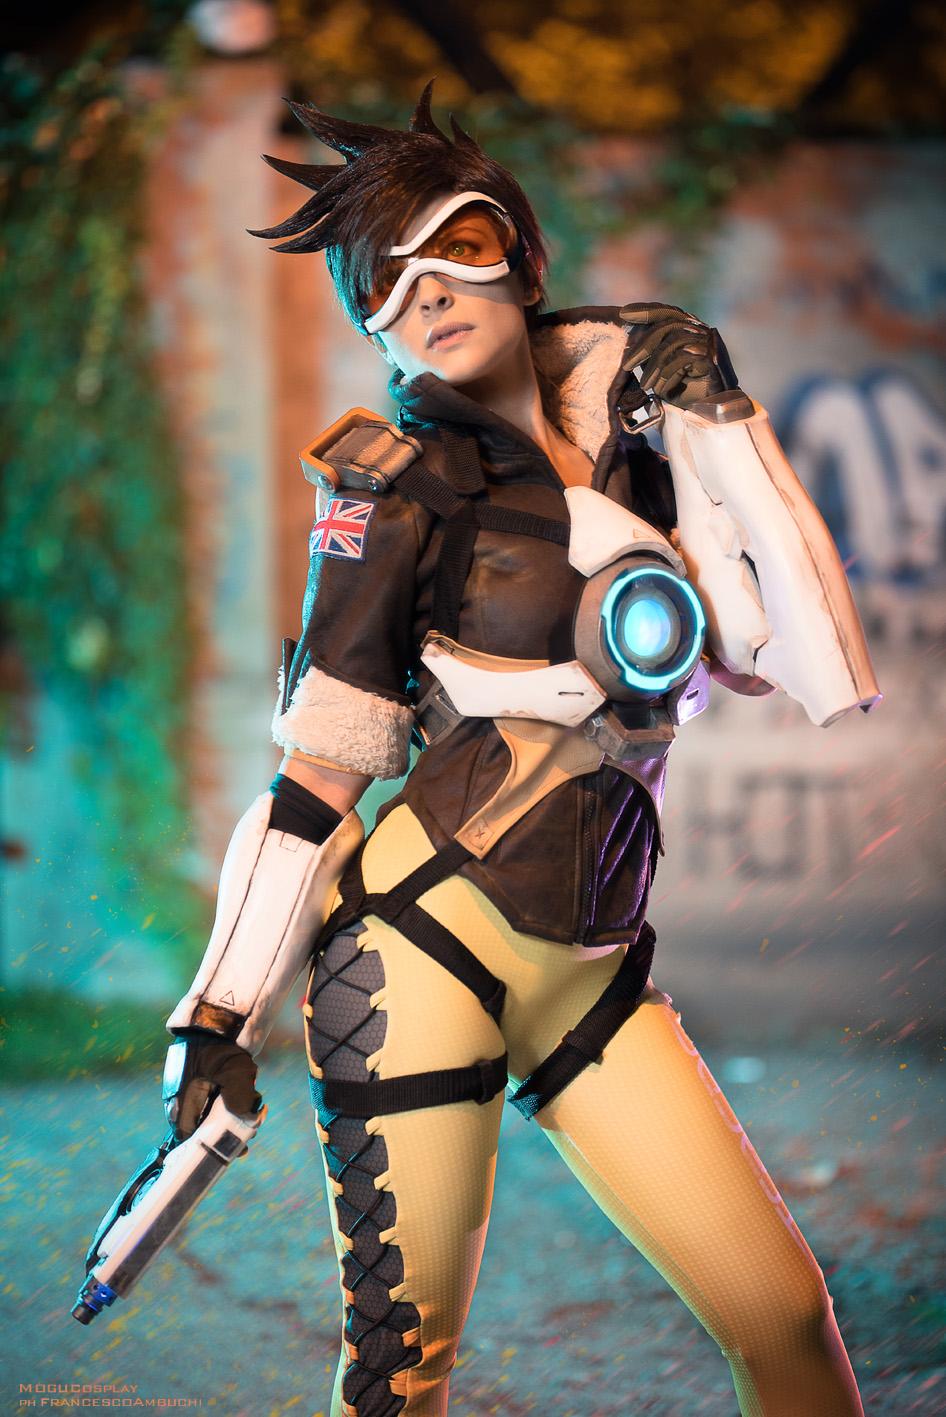 70+ Hot Pictures of Tracer From Overwatch 2